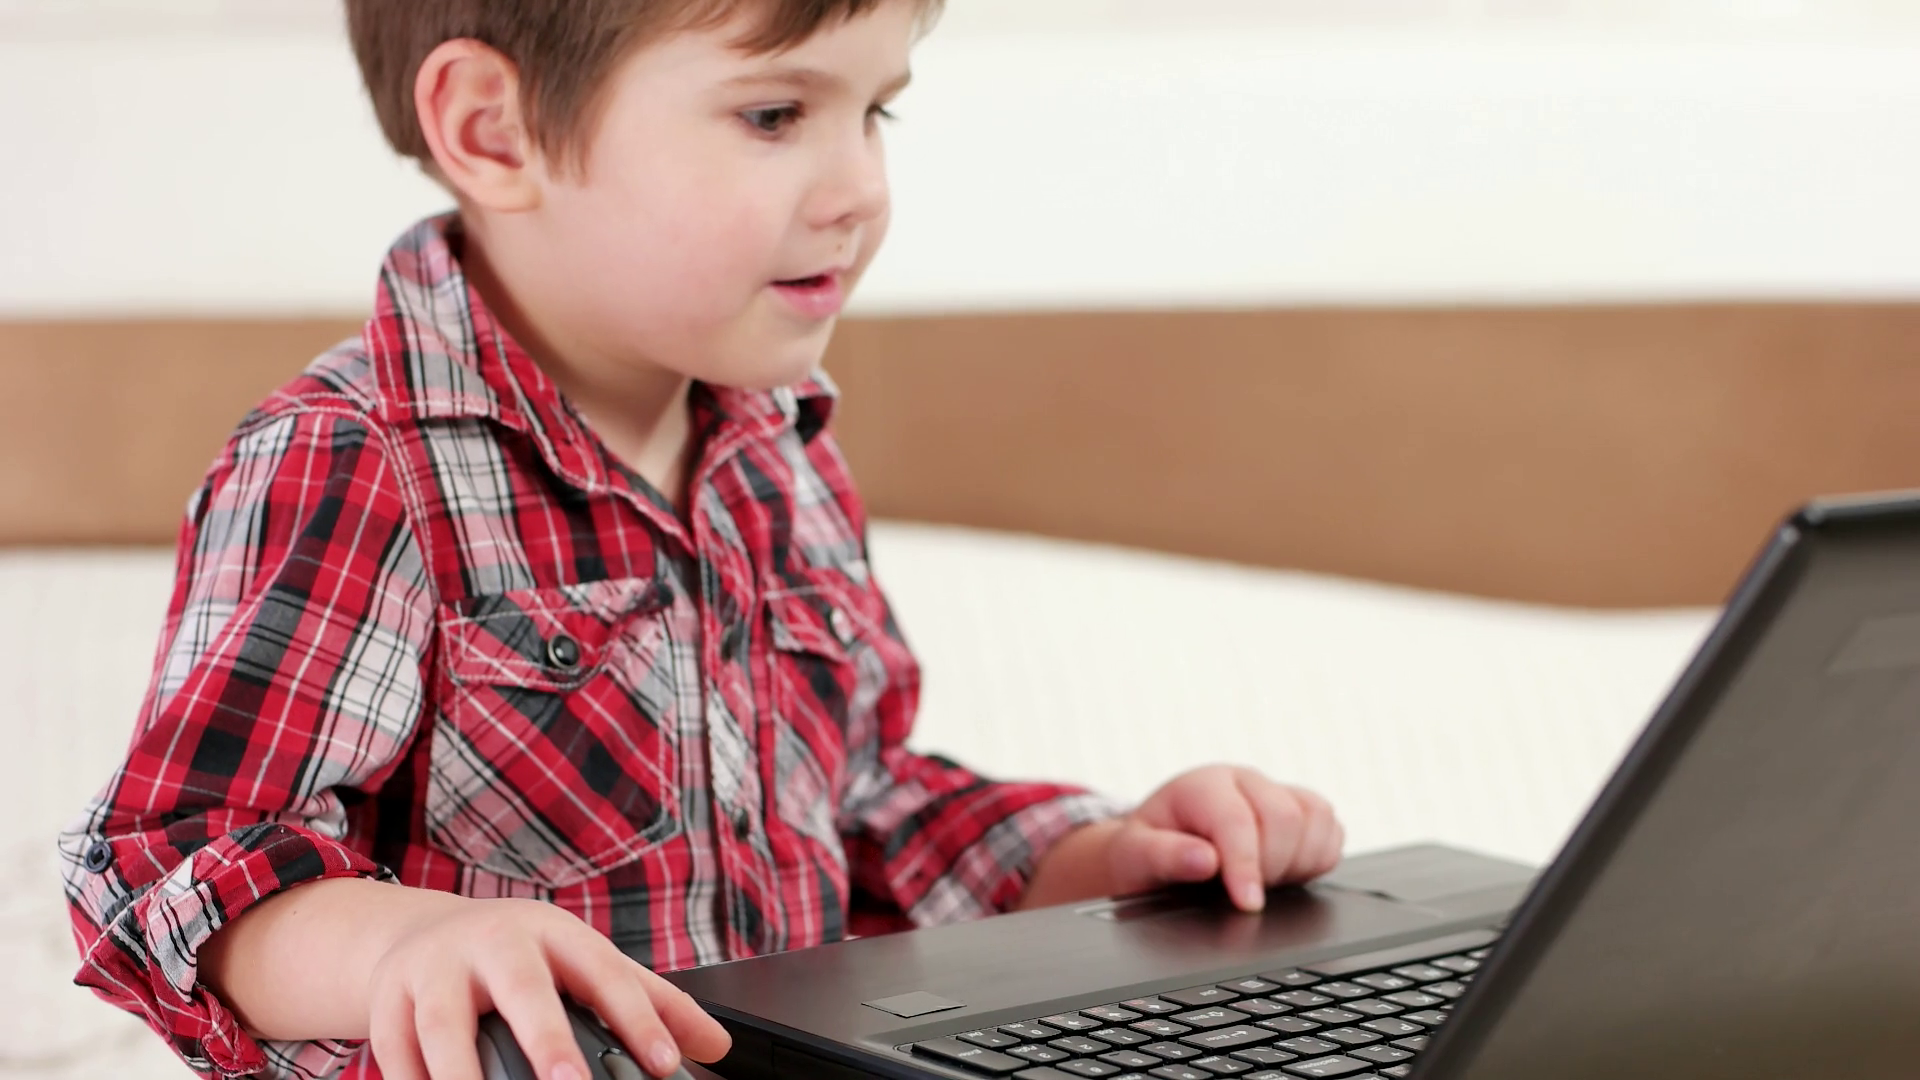 child using laptop, little boy playing computer games using touchpad ...